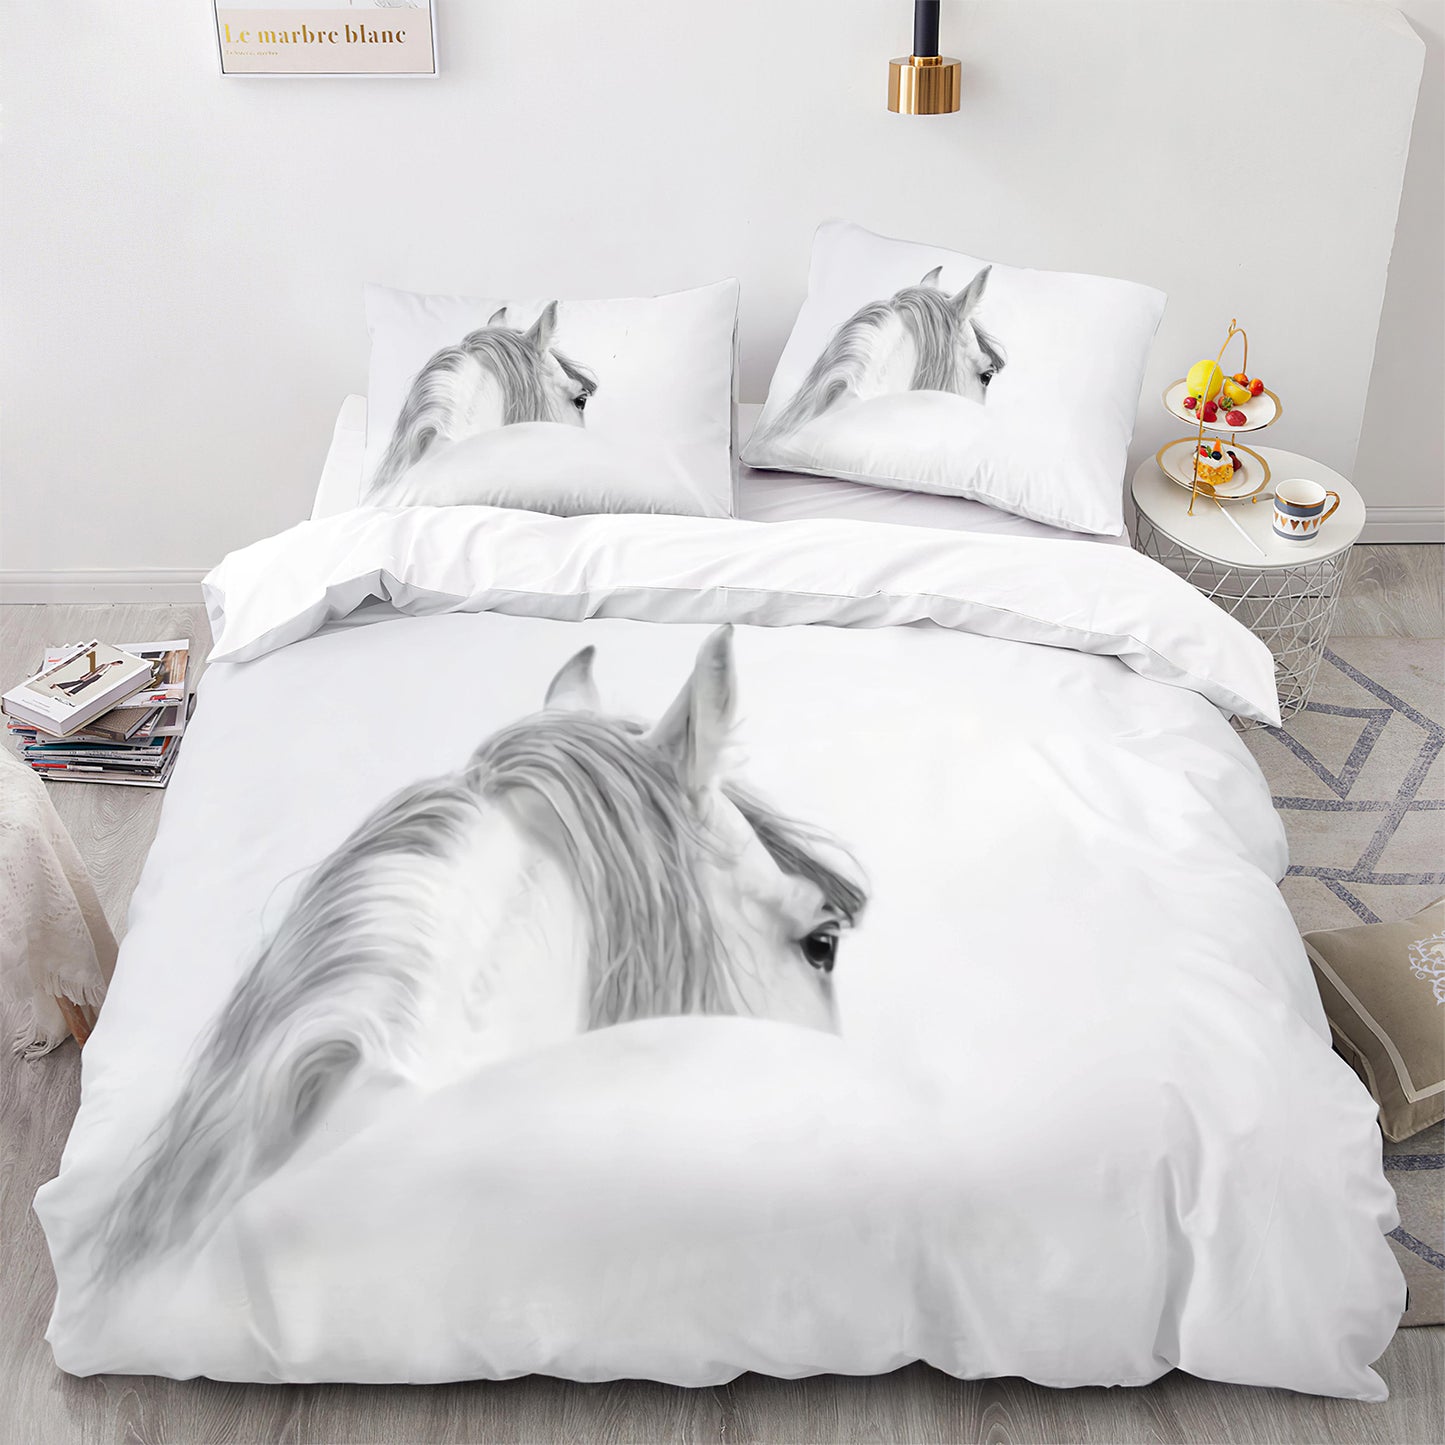 Cutom Duvet Cover Set Pattern Chic Comforter Cover King Size for Teens Adults Bedding Set with Pillowcases  M1104